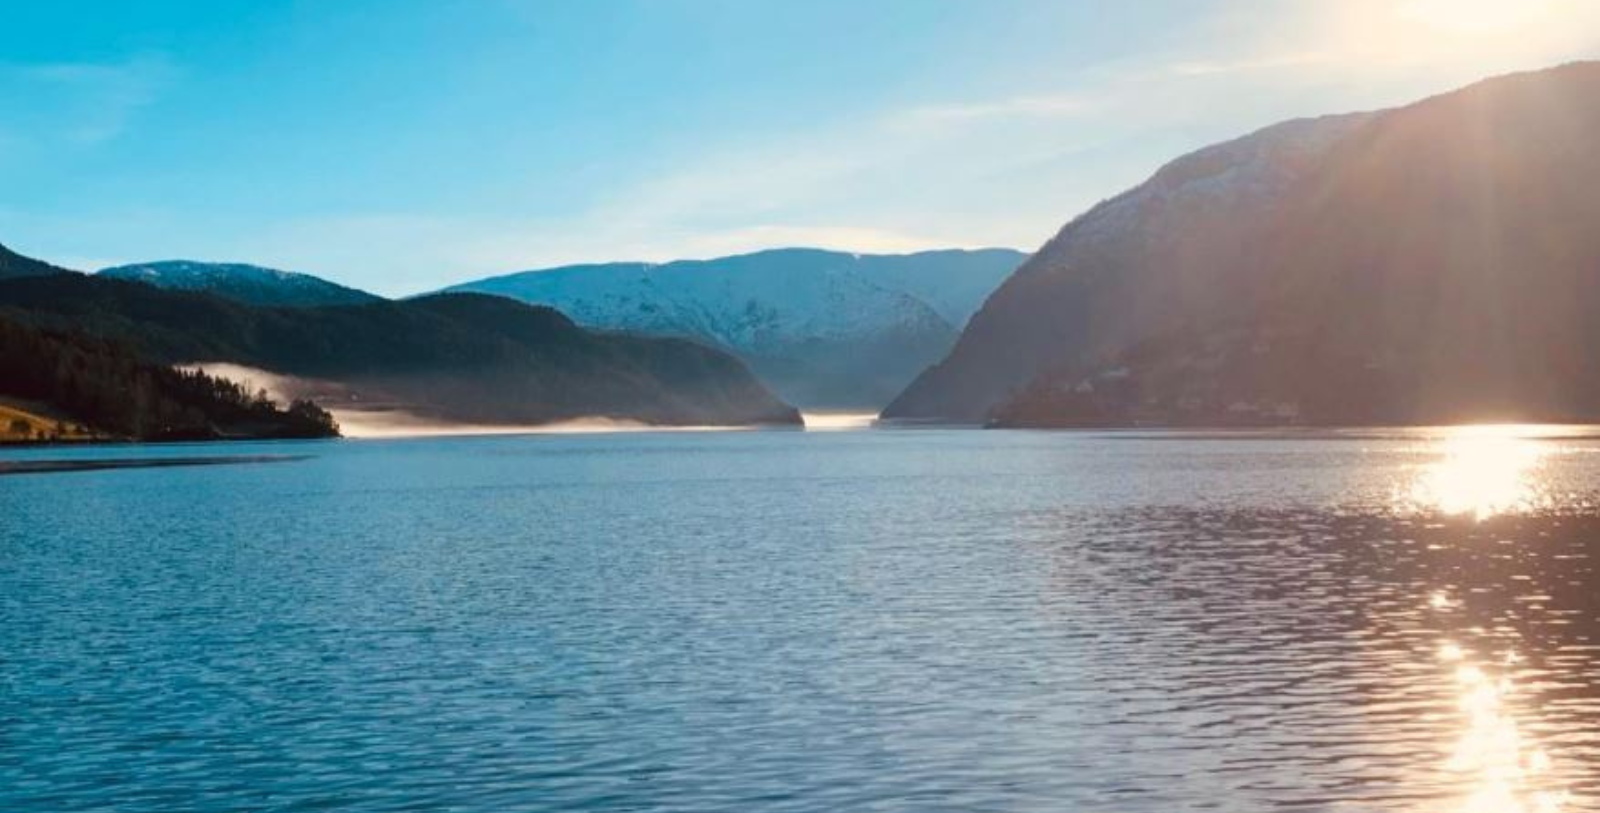 Experience the pristine landscapes of the “Queen of the Fjords” by boat, bus, train, and foot during a “Hardangerfjord in a Nutshell” tour.